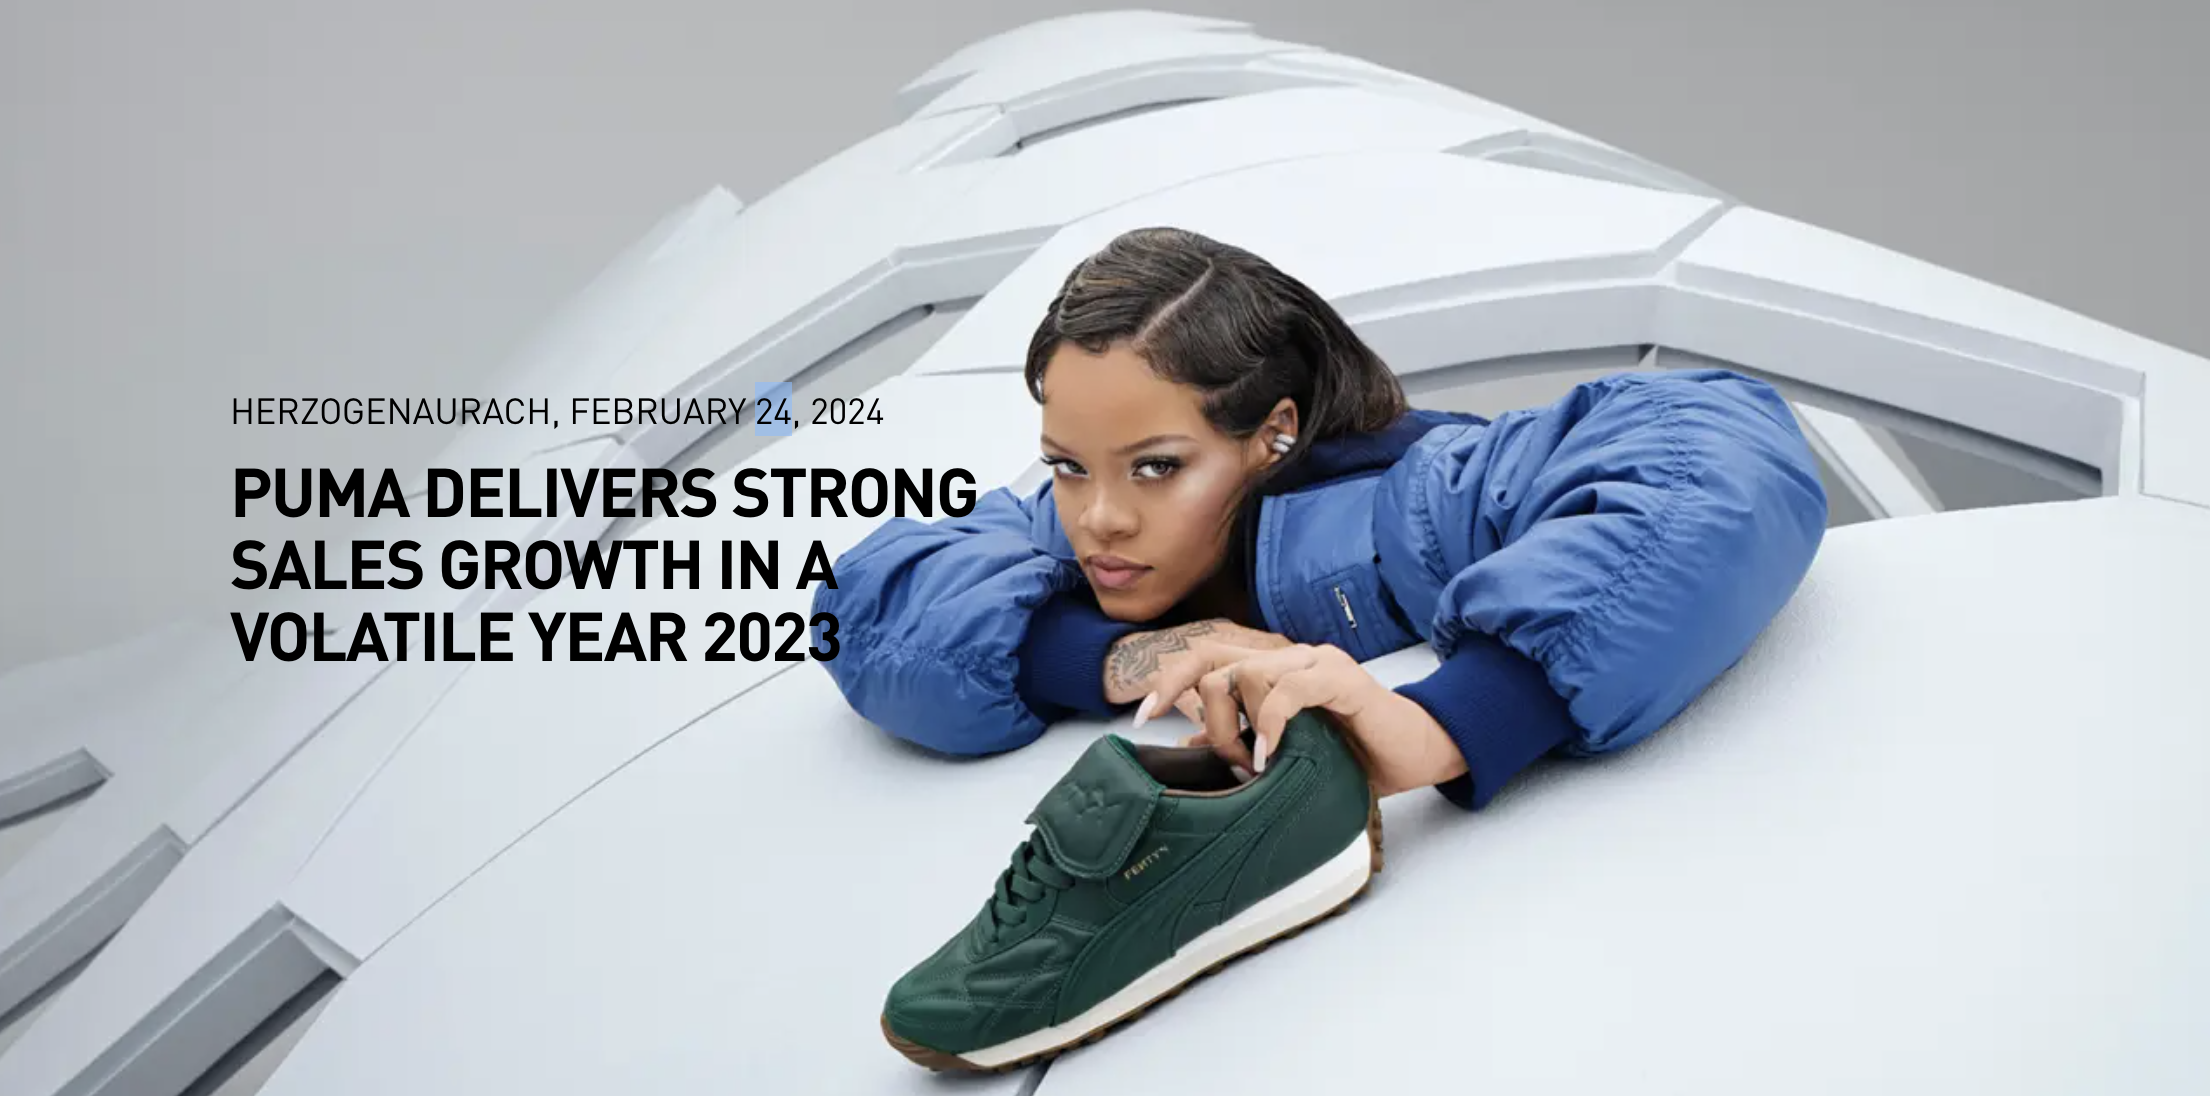 PUMA 2023FY Report: About 40% of Products Sold in China This Year Will Be Designed Locally